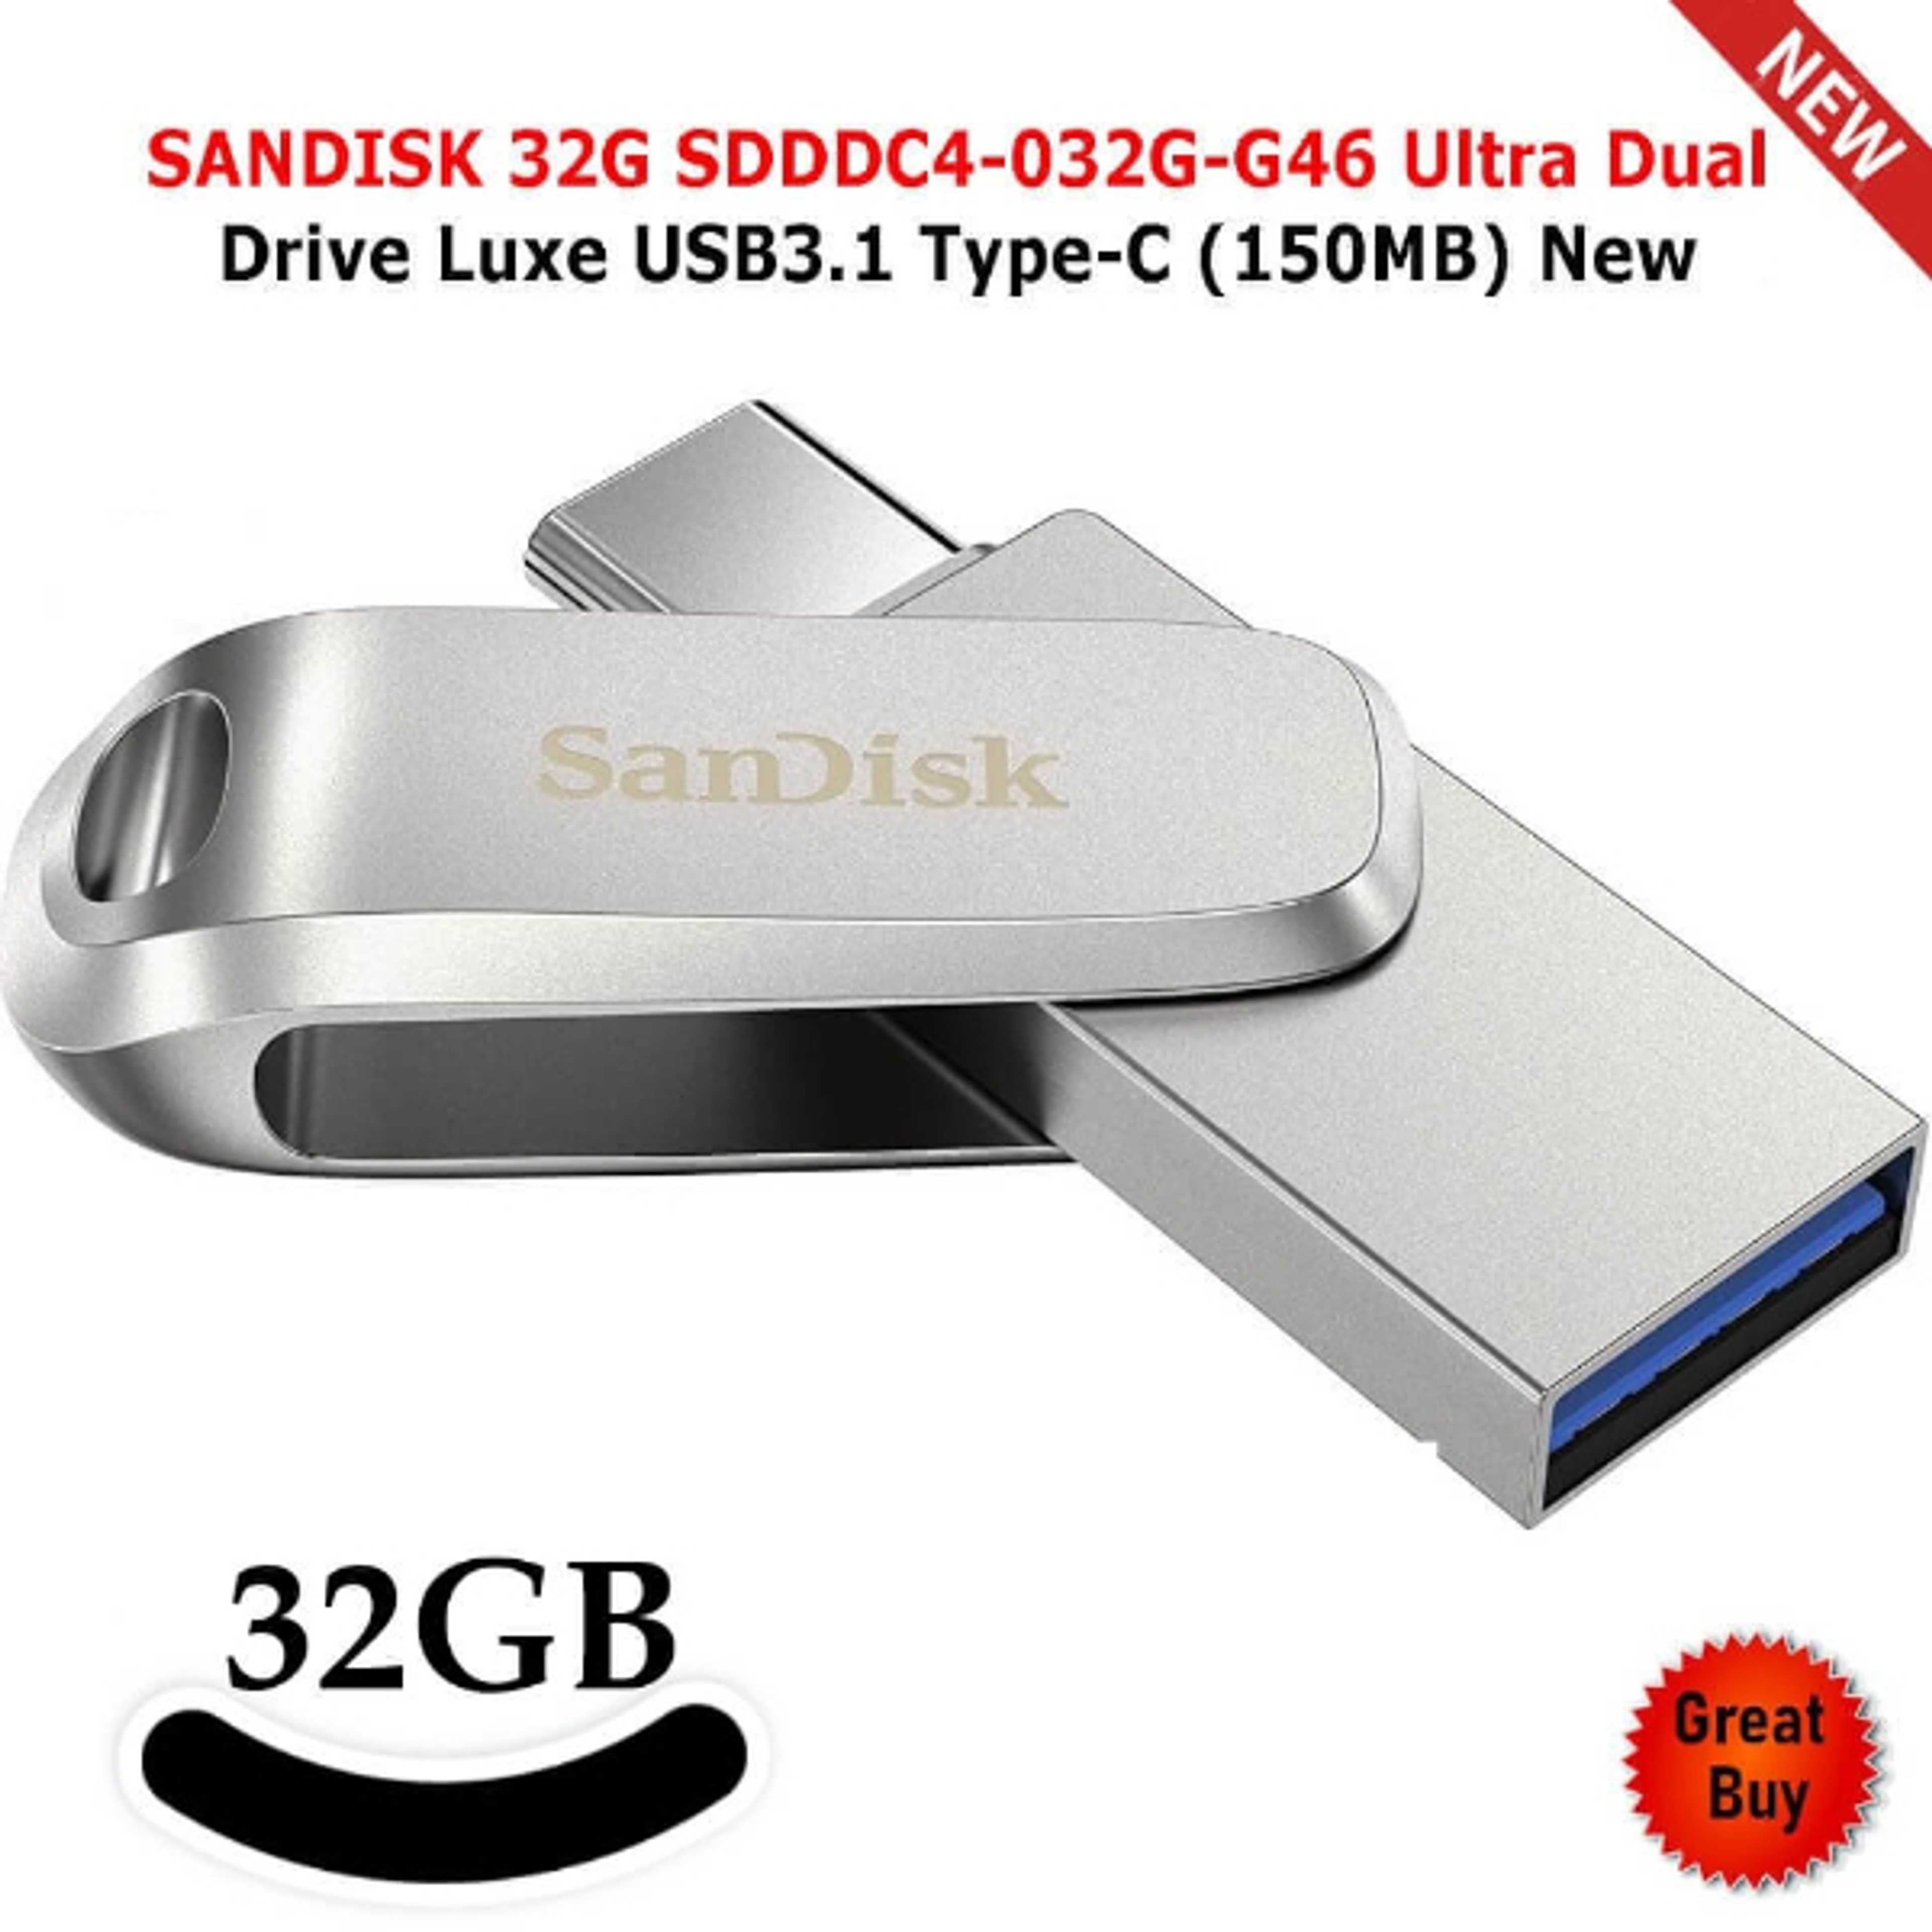 32GB Sandisk Ultra Luxe Dual Drive USB OTG Type-C 3.1 Speed